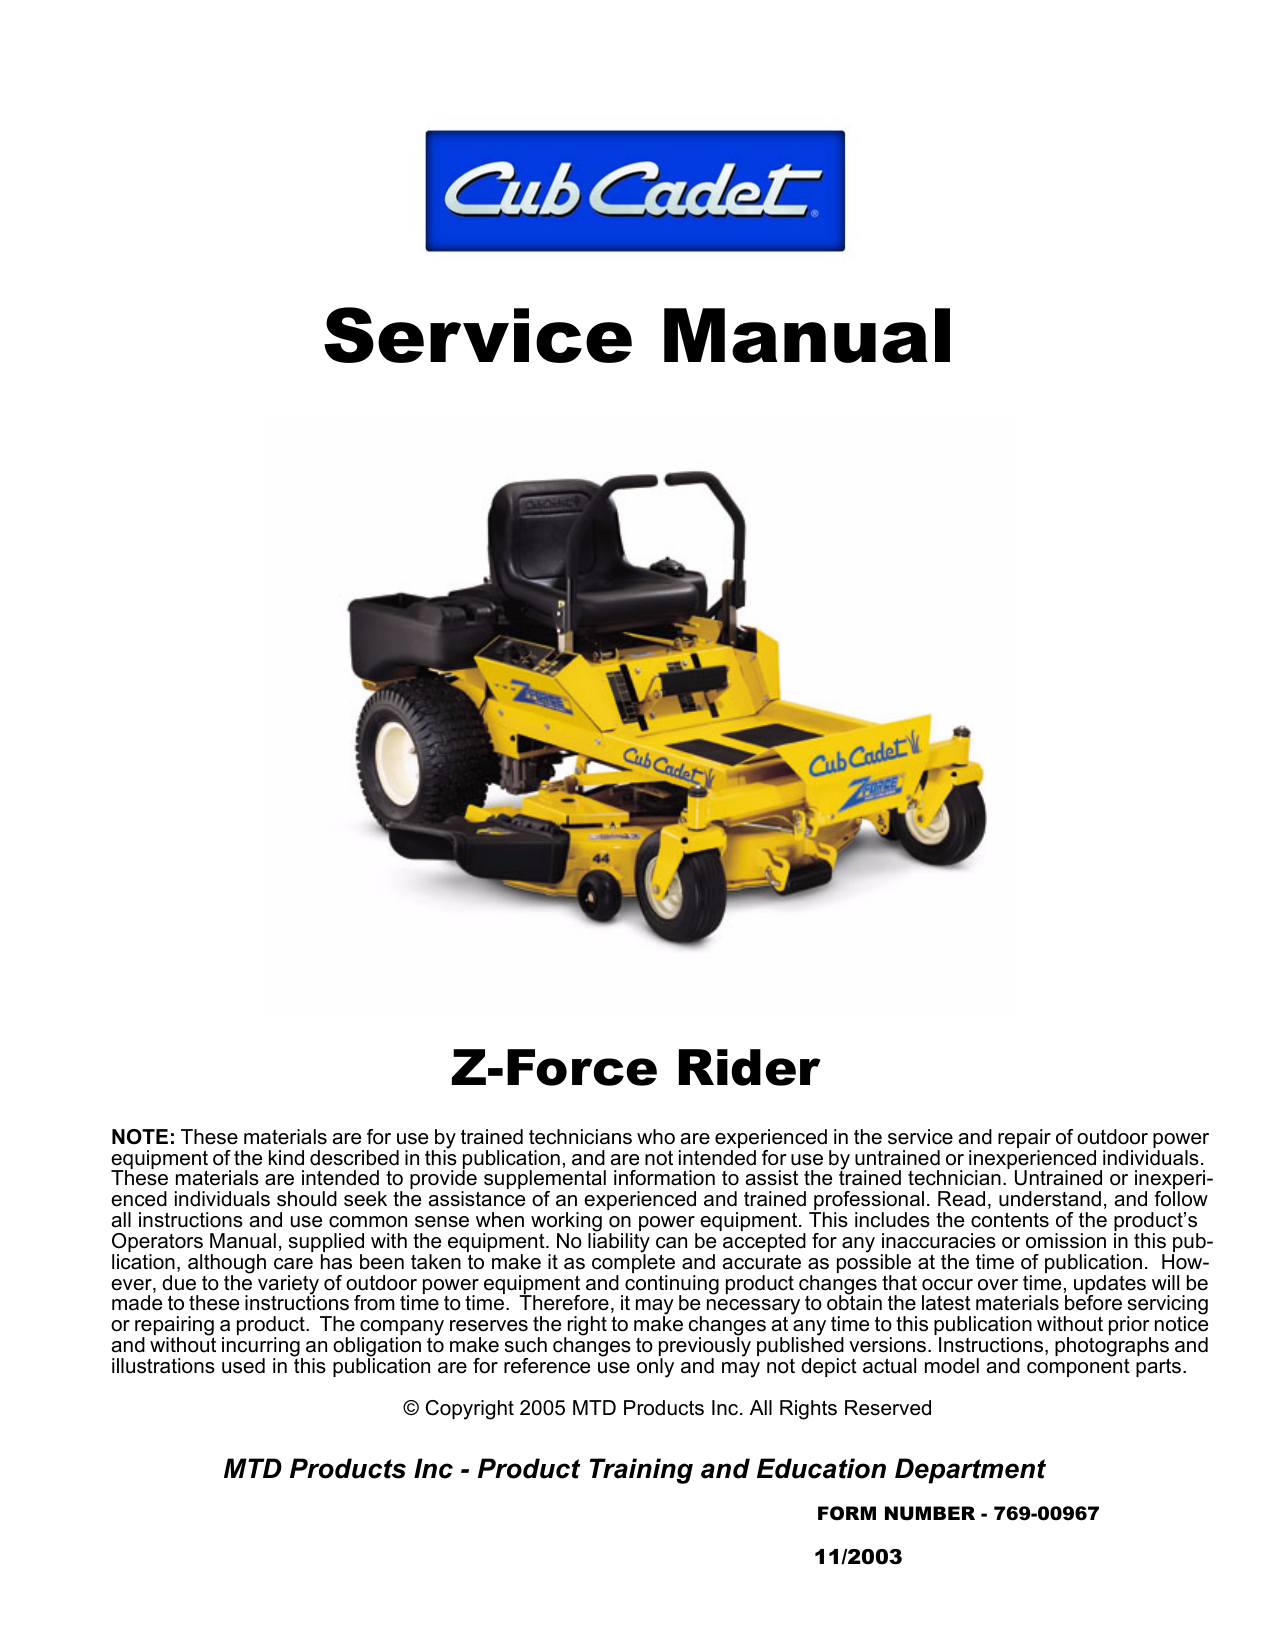 2002-2013 Cub Cadet™ 42, 44, 48 Z Force Rider ZTR zero-turn mower service manual Preview image 2